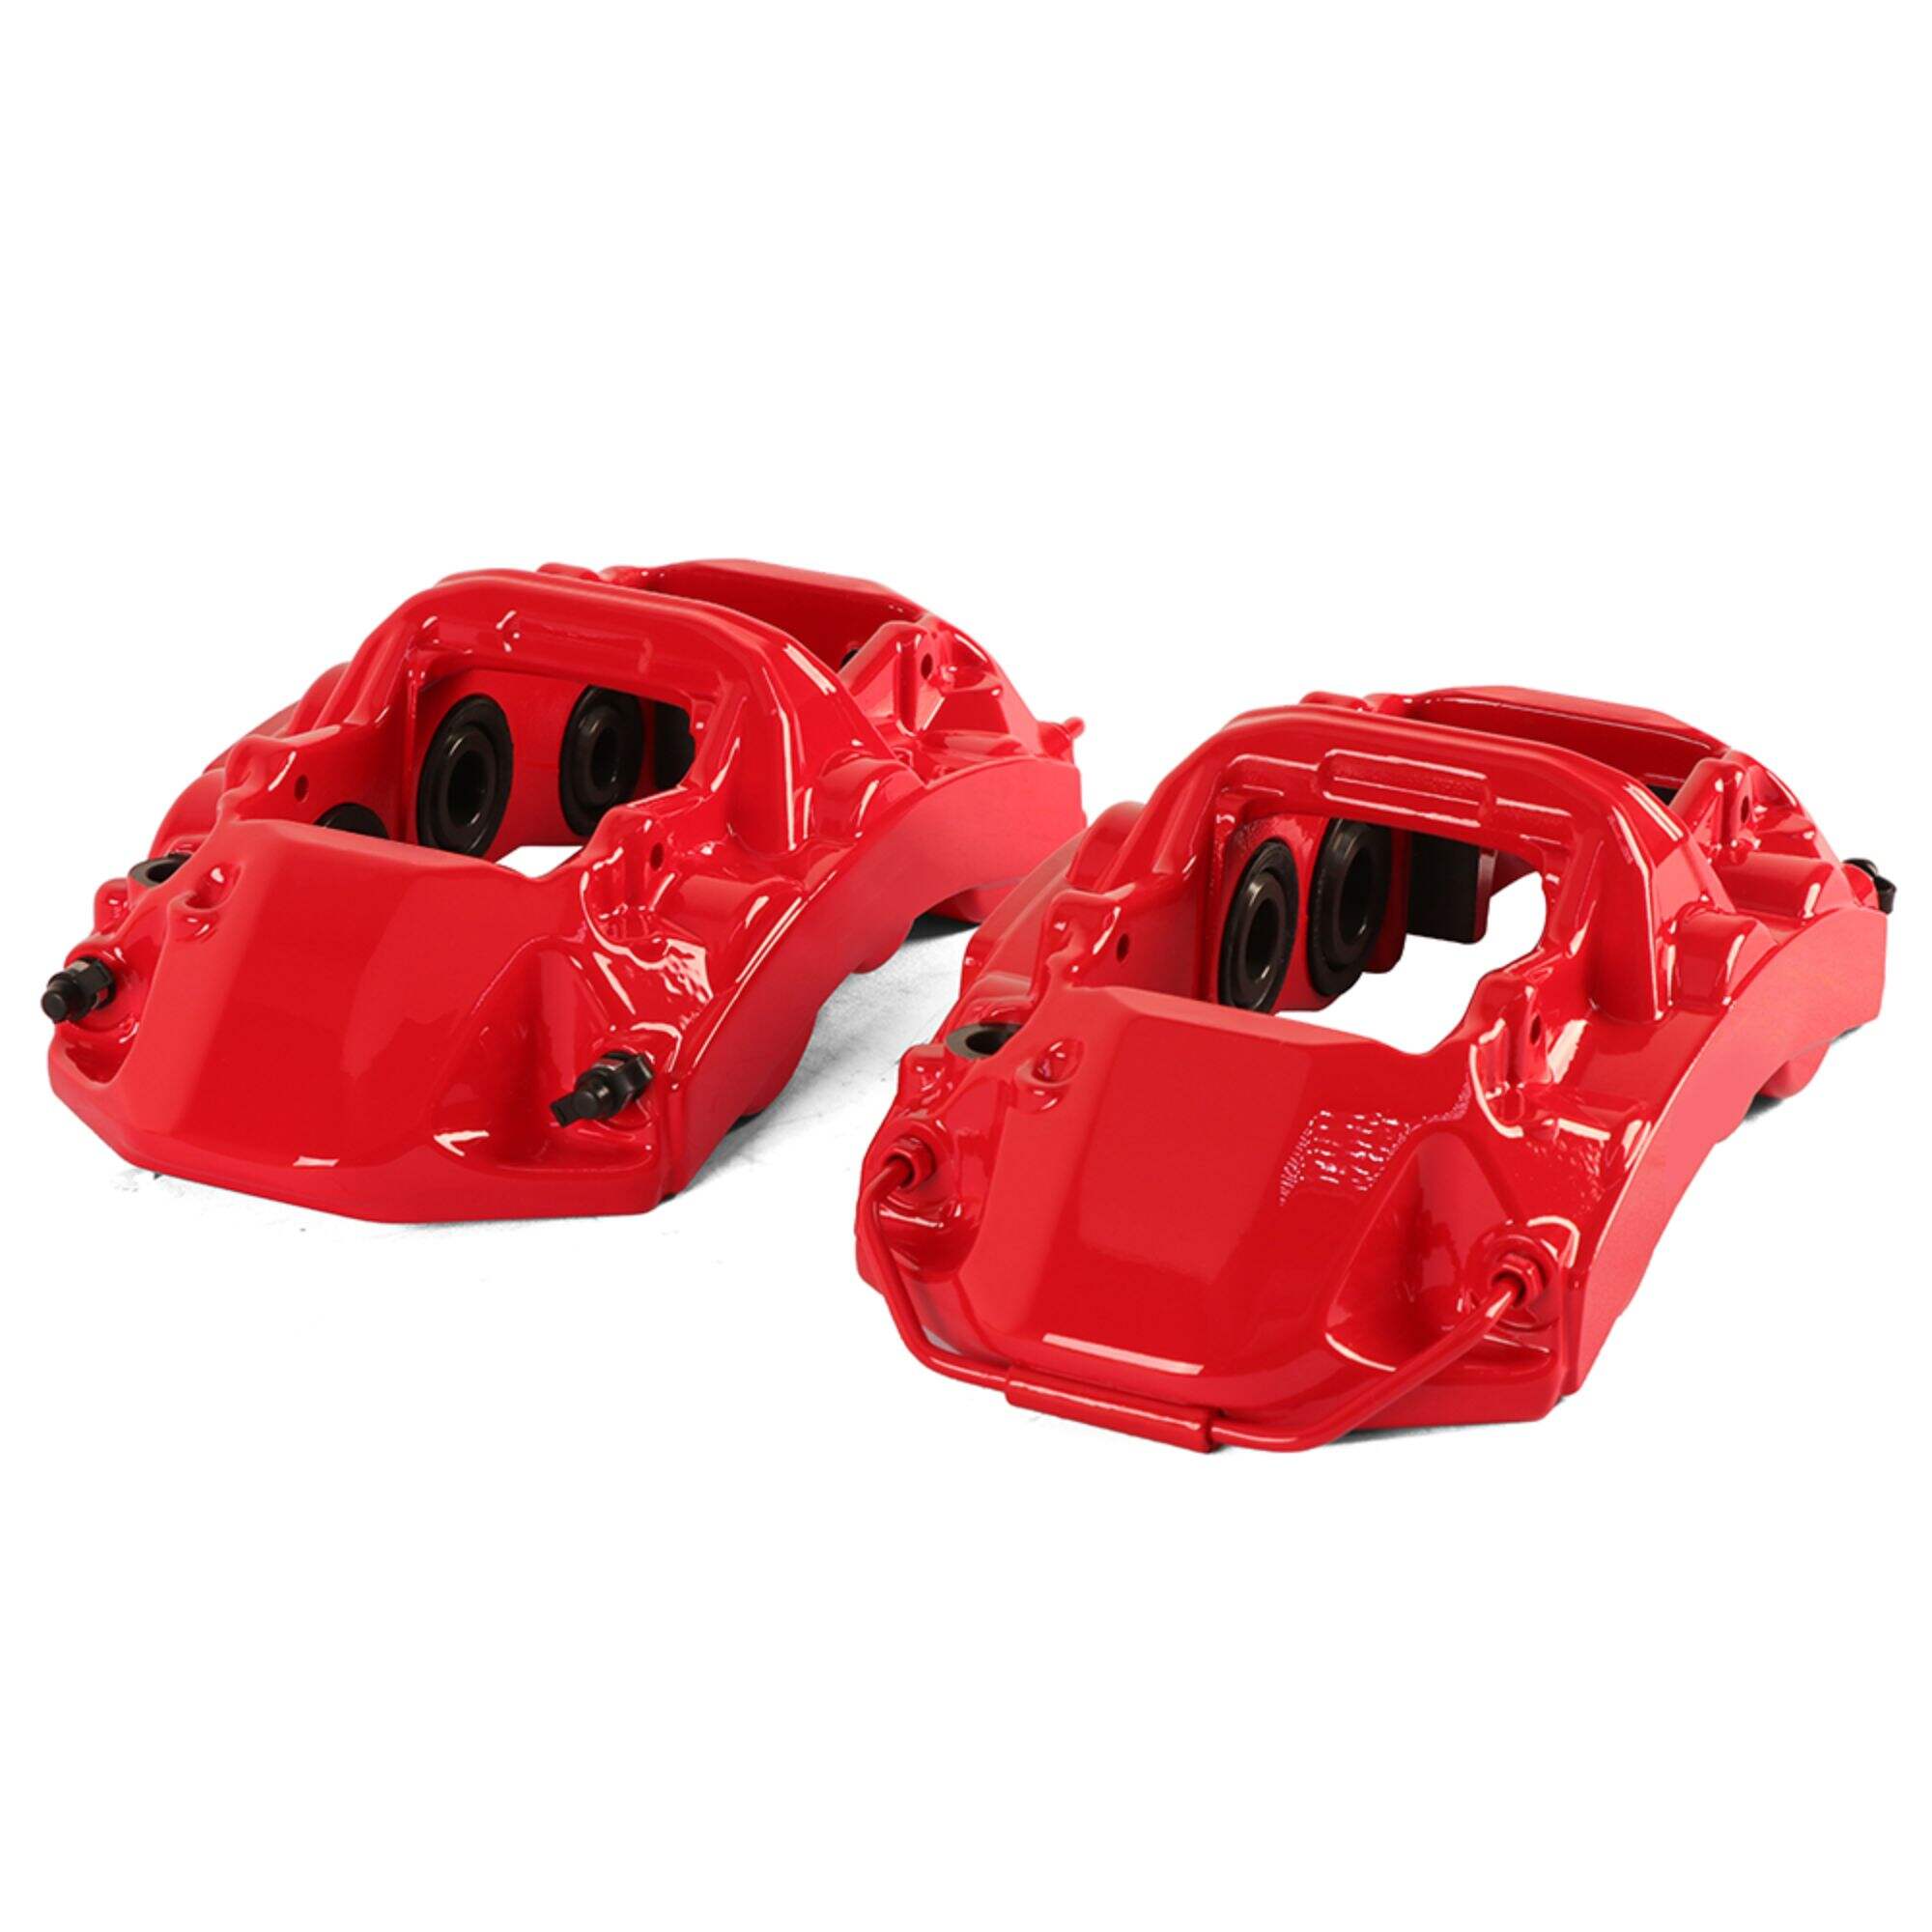 Advanced car braking system 6-piston large brake caliper GT6 brake rotor suitable for cars with wheels above 18 inches